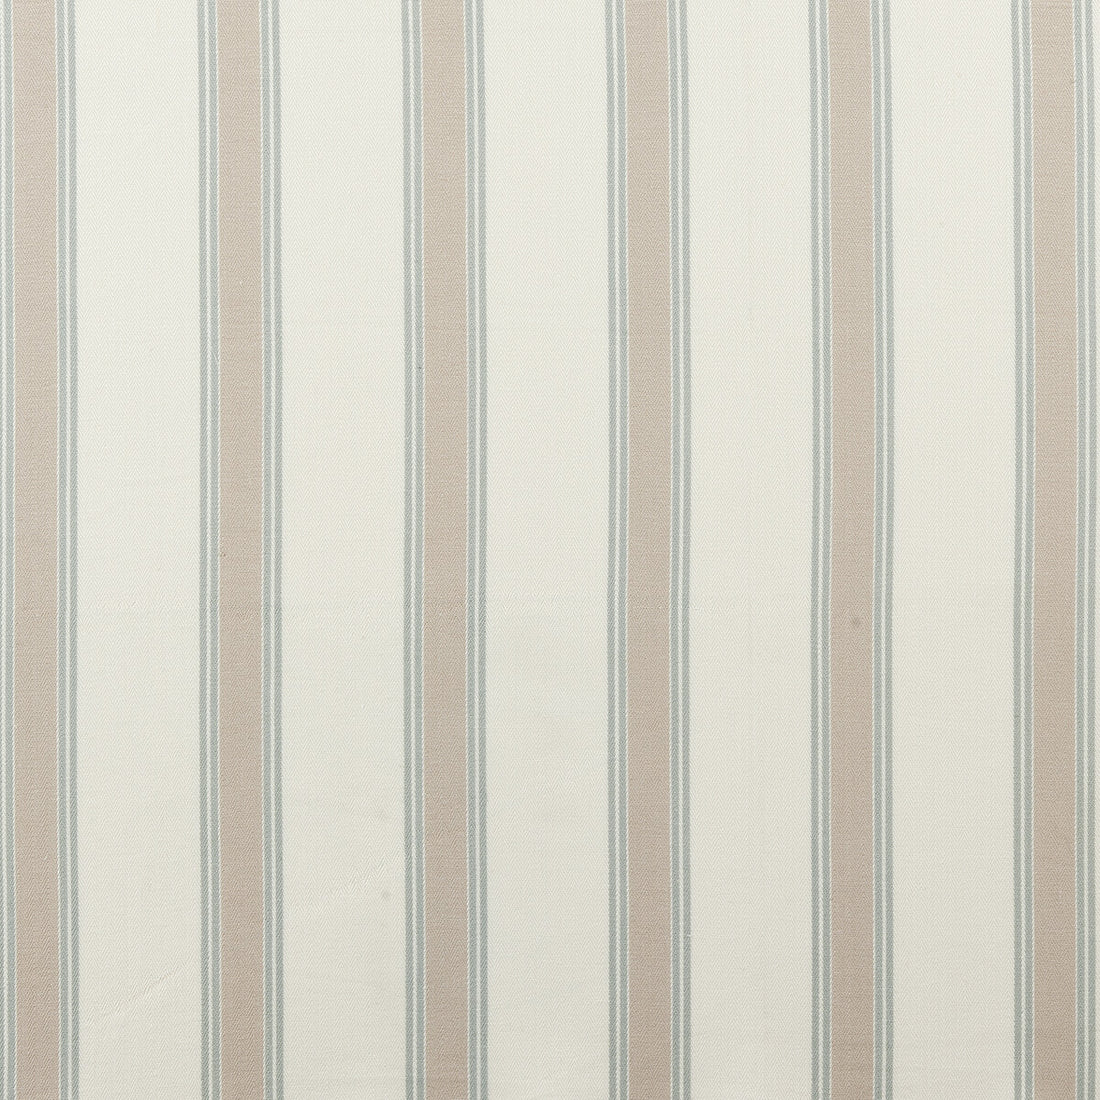 Oxford fabric in duckegg color - pattern F0419/02.CAC.0 - by Clarke And Clarke in the Clarke &amp; Clarke Ticking Stripes collection